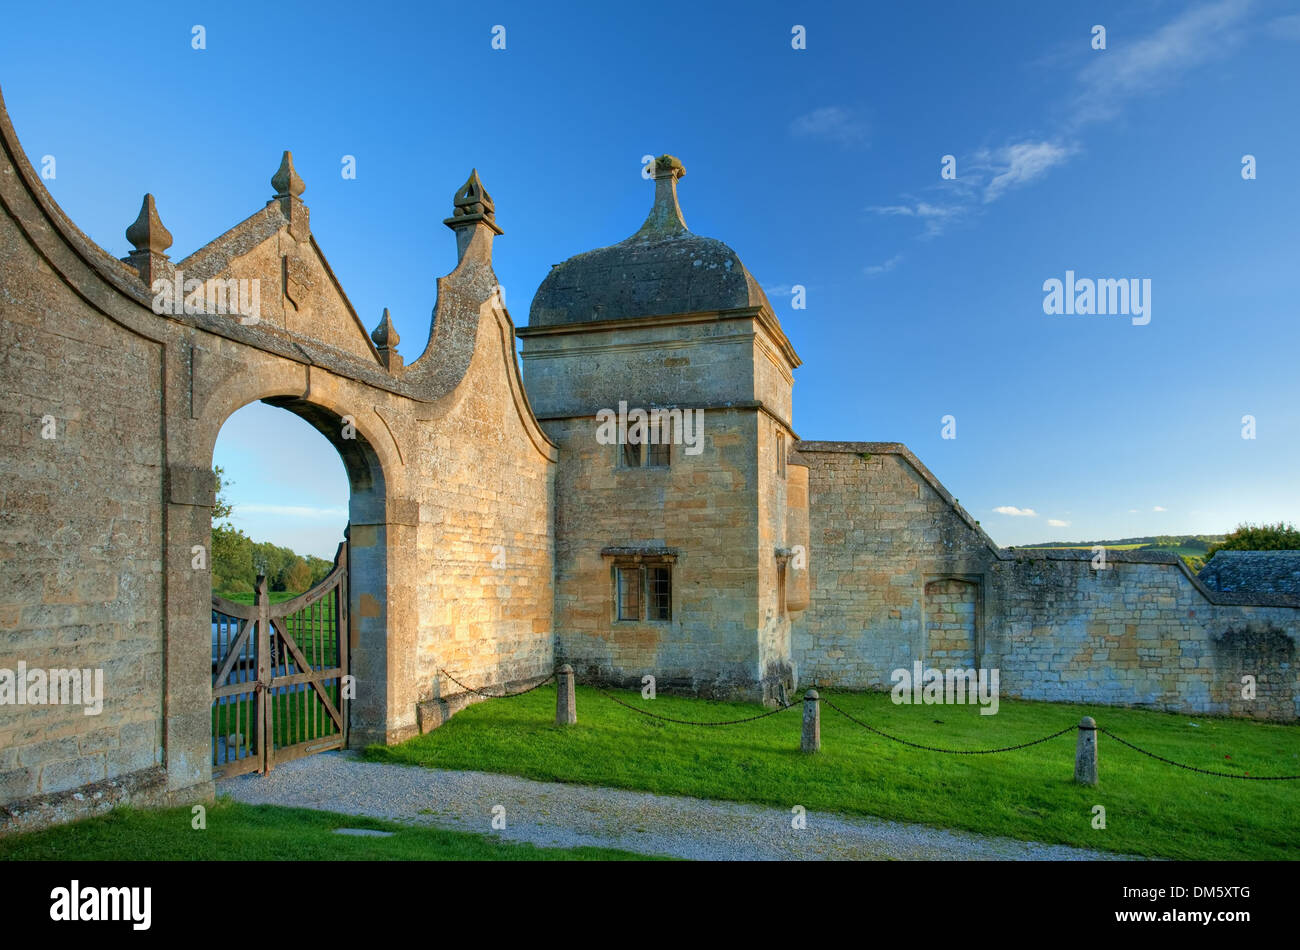 The historic Jacobean gatehouse to the Banqueting Hall at Chipping Campden, Gloucestershire, England. Stock Photo